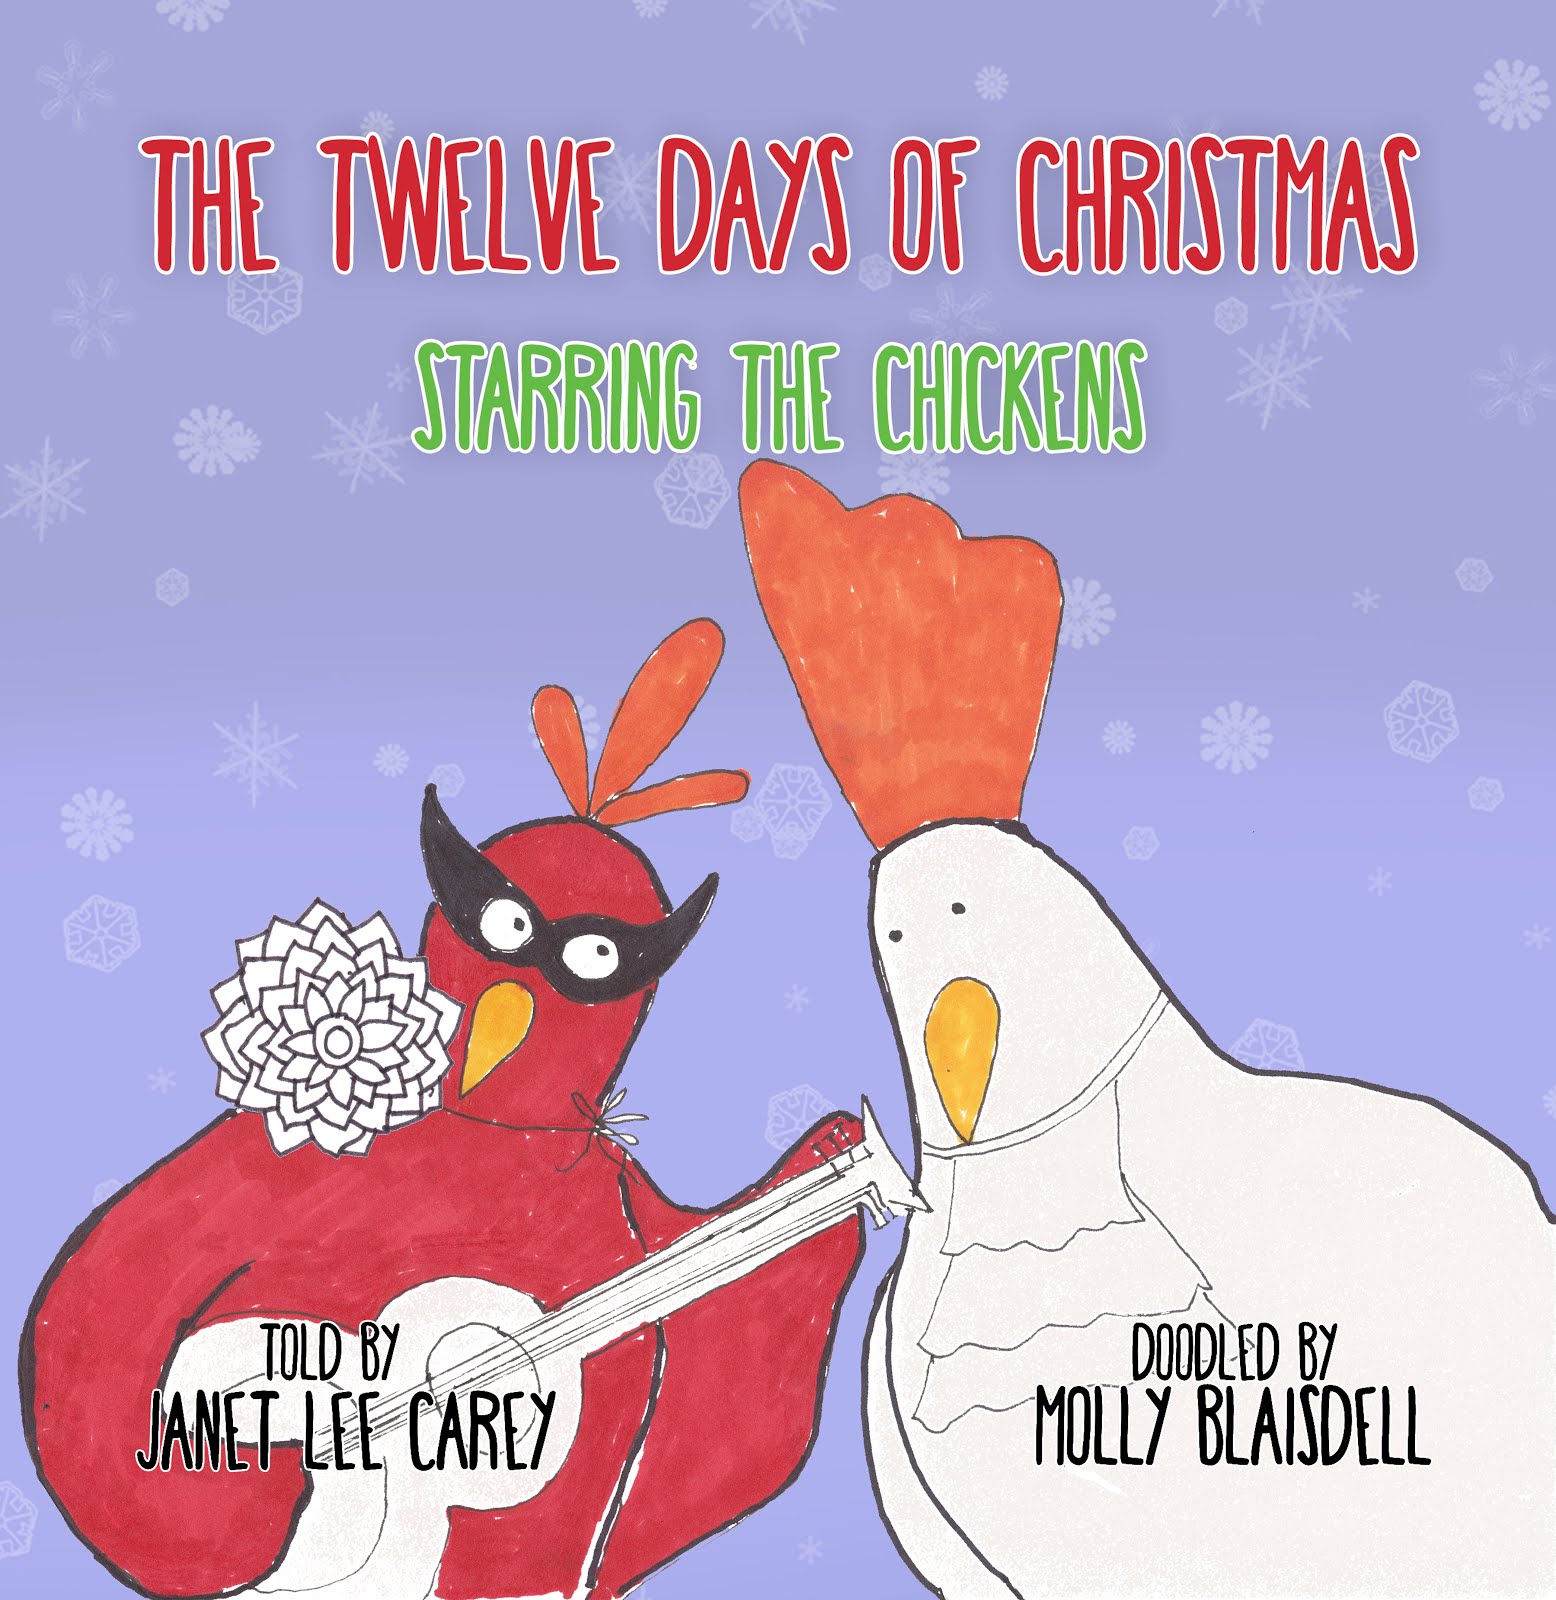 The Twelve Days of Christmas: Starring the Chickens